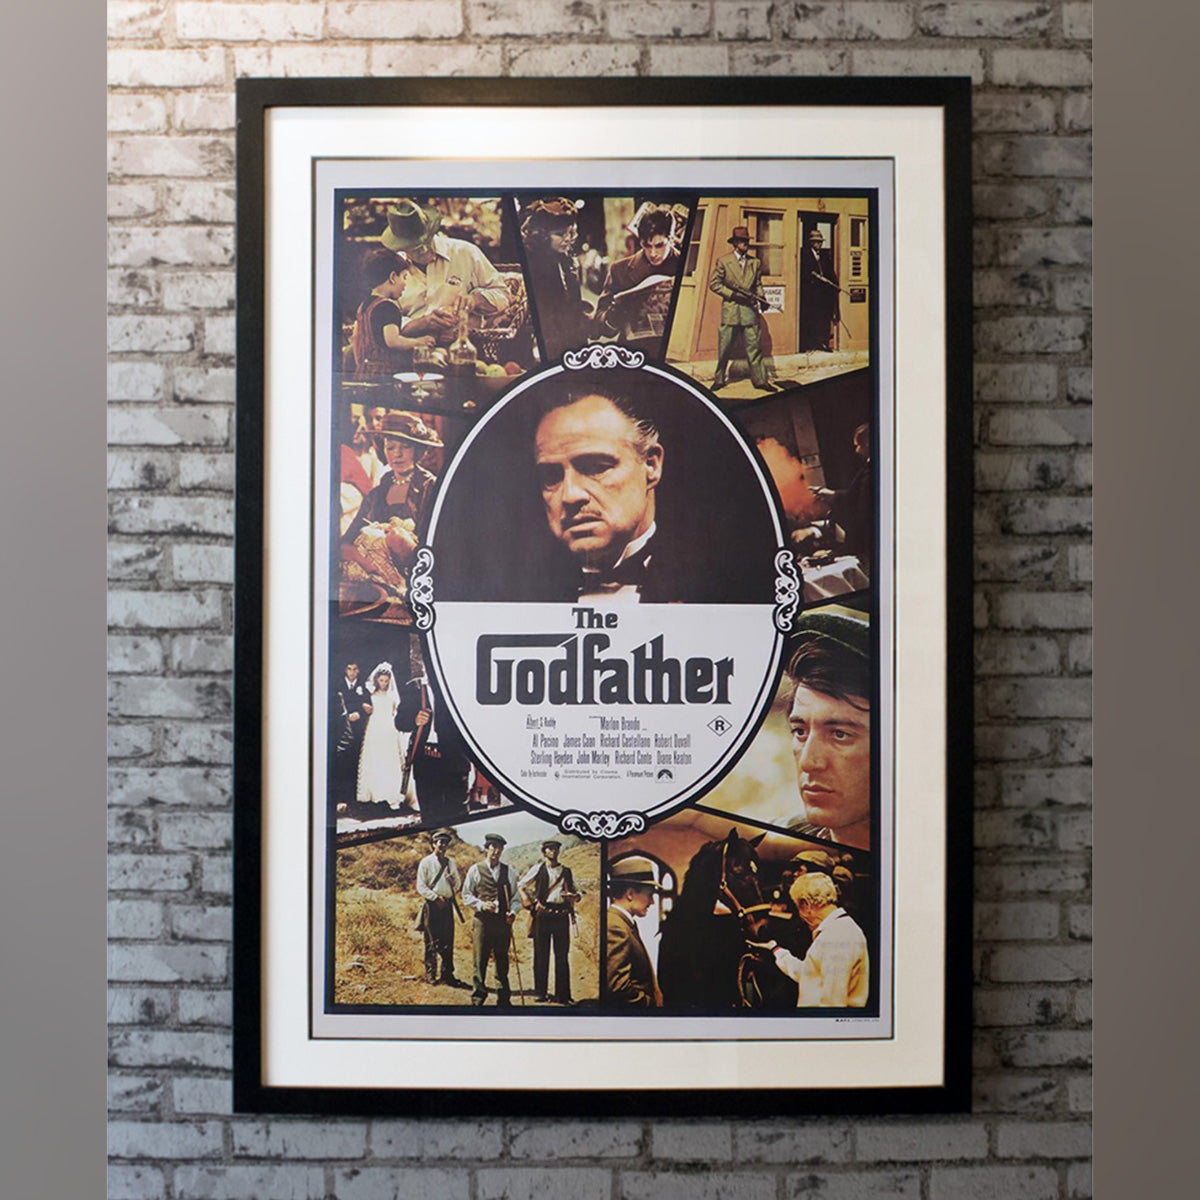 Original Movie Poster of Godfather, The (1972)